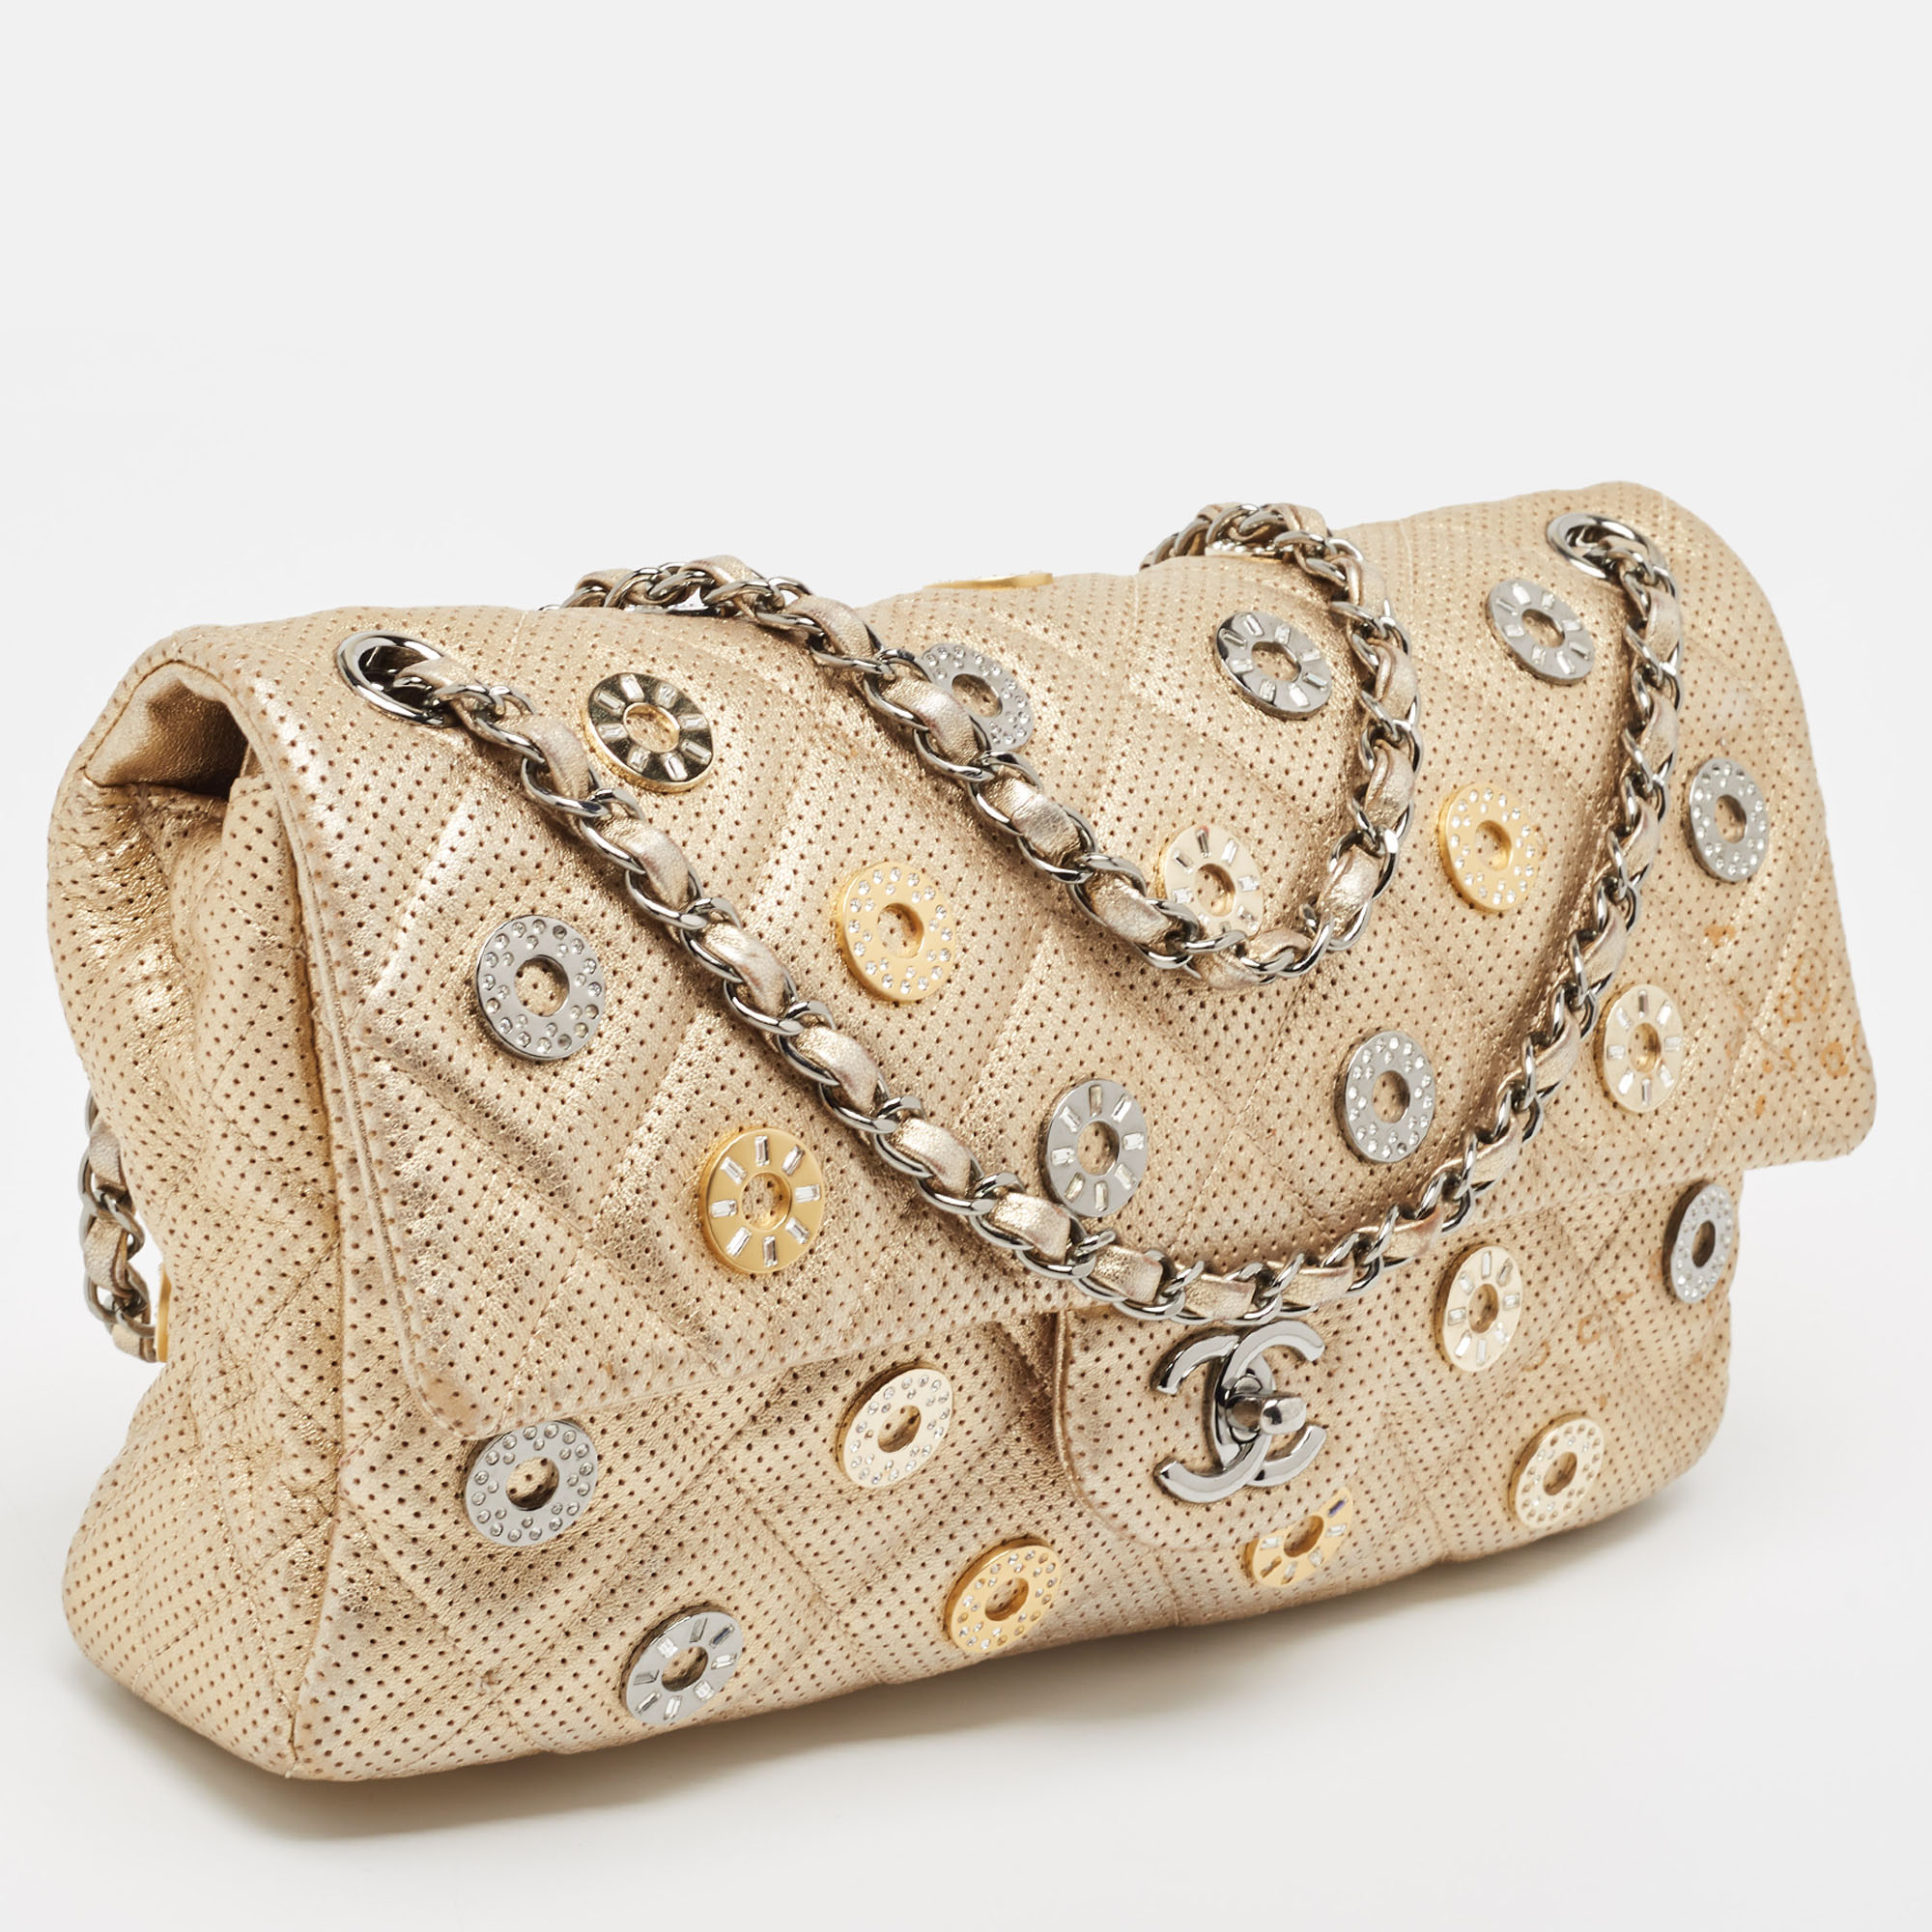 Chanel Gold Quilted Perforated Leather Embellished East/West Classic Flap Bag